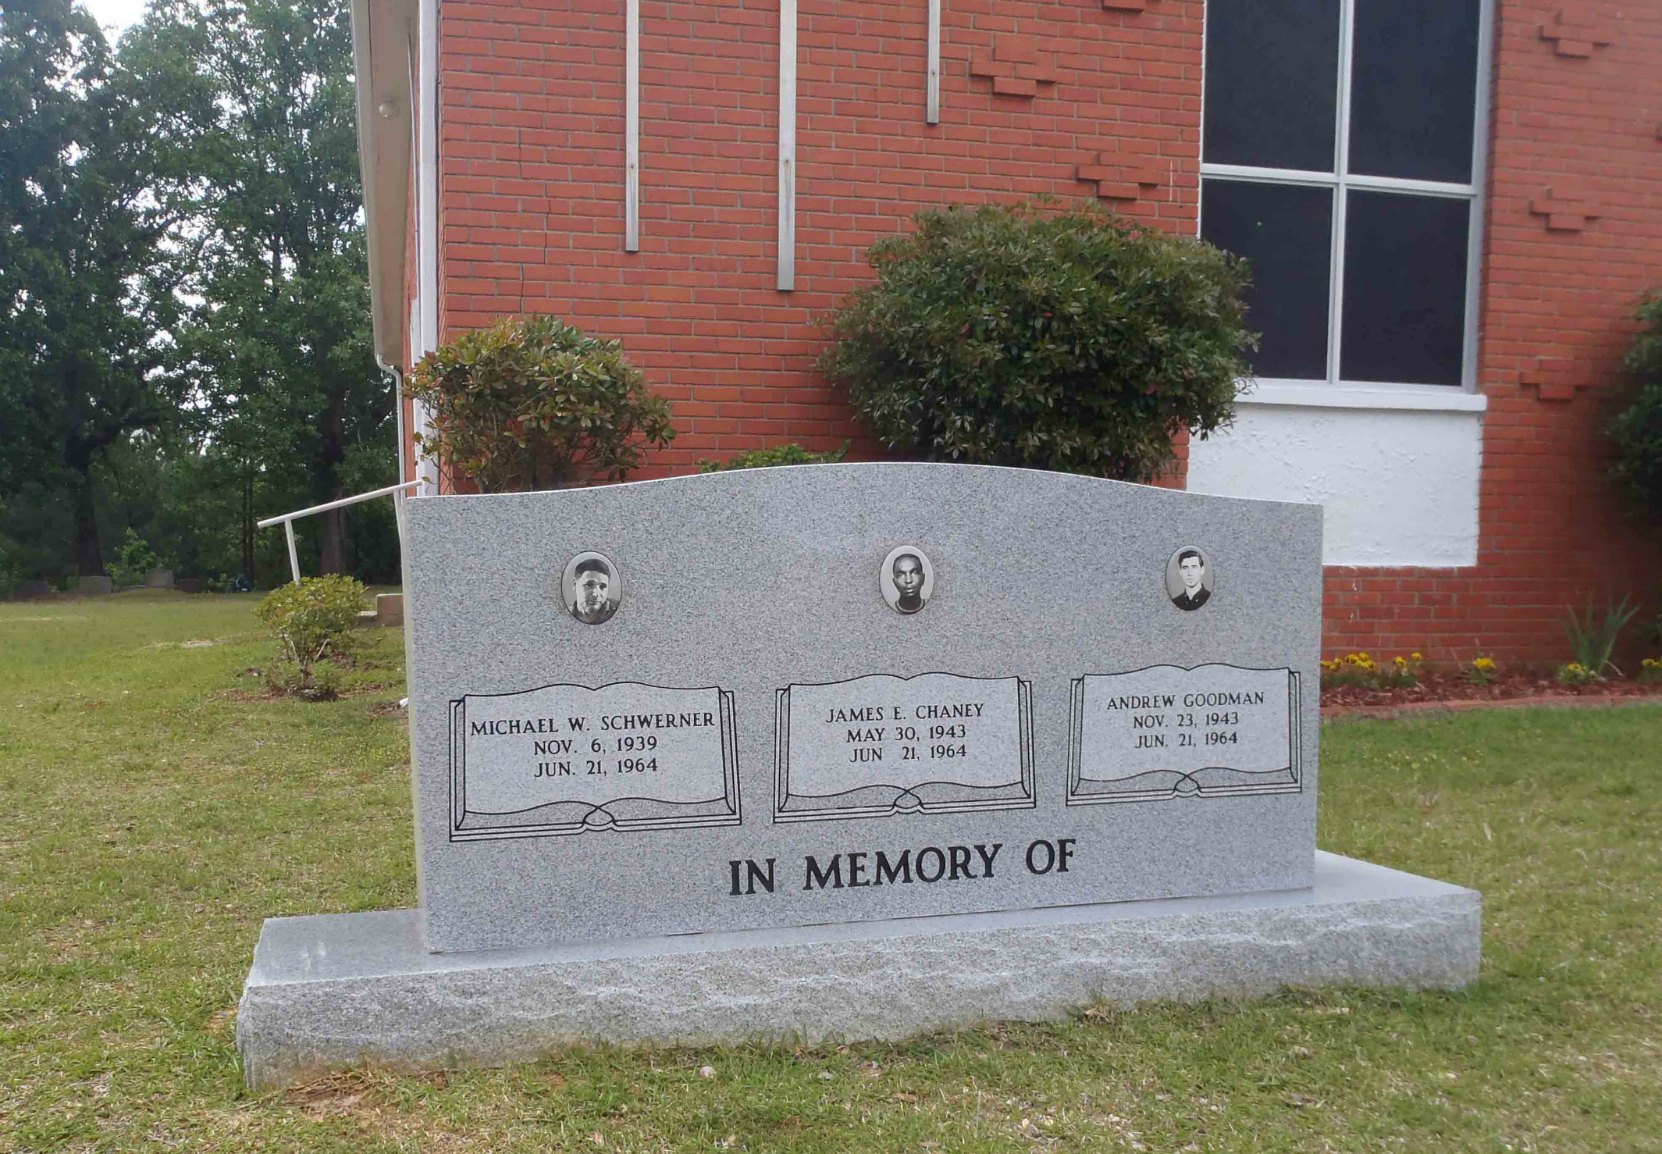 Memorial to Michael Schwerner, James Chaney and Andrew Goodman in front of Mt. Zion United Methodist Church, Neshoba County, Mississippi